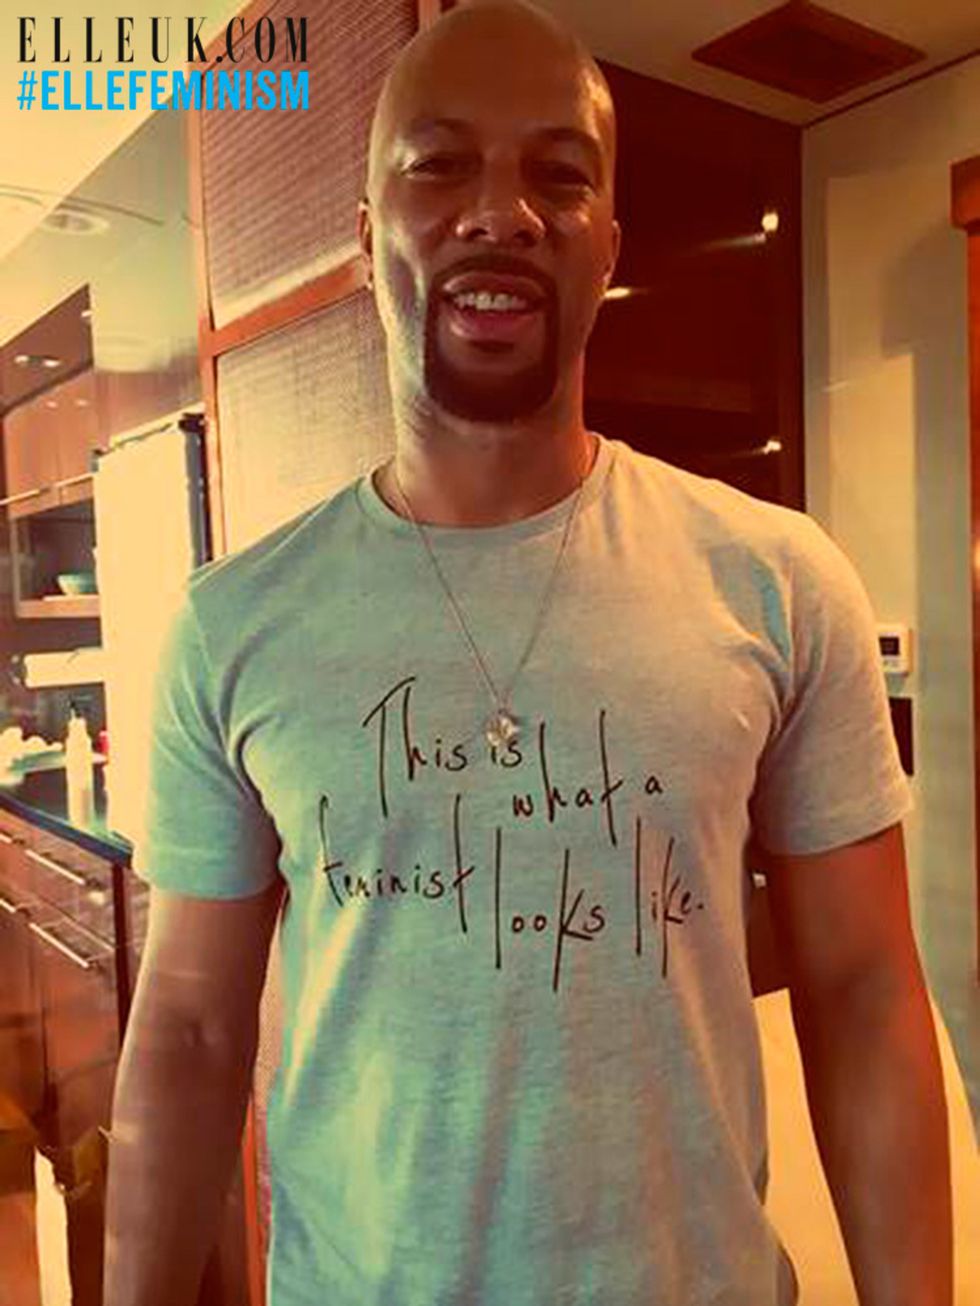 Common, actor, singer and feminist